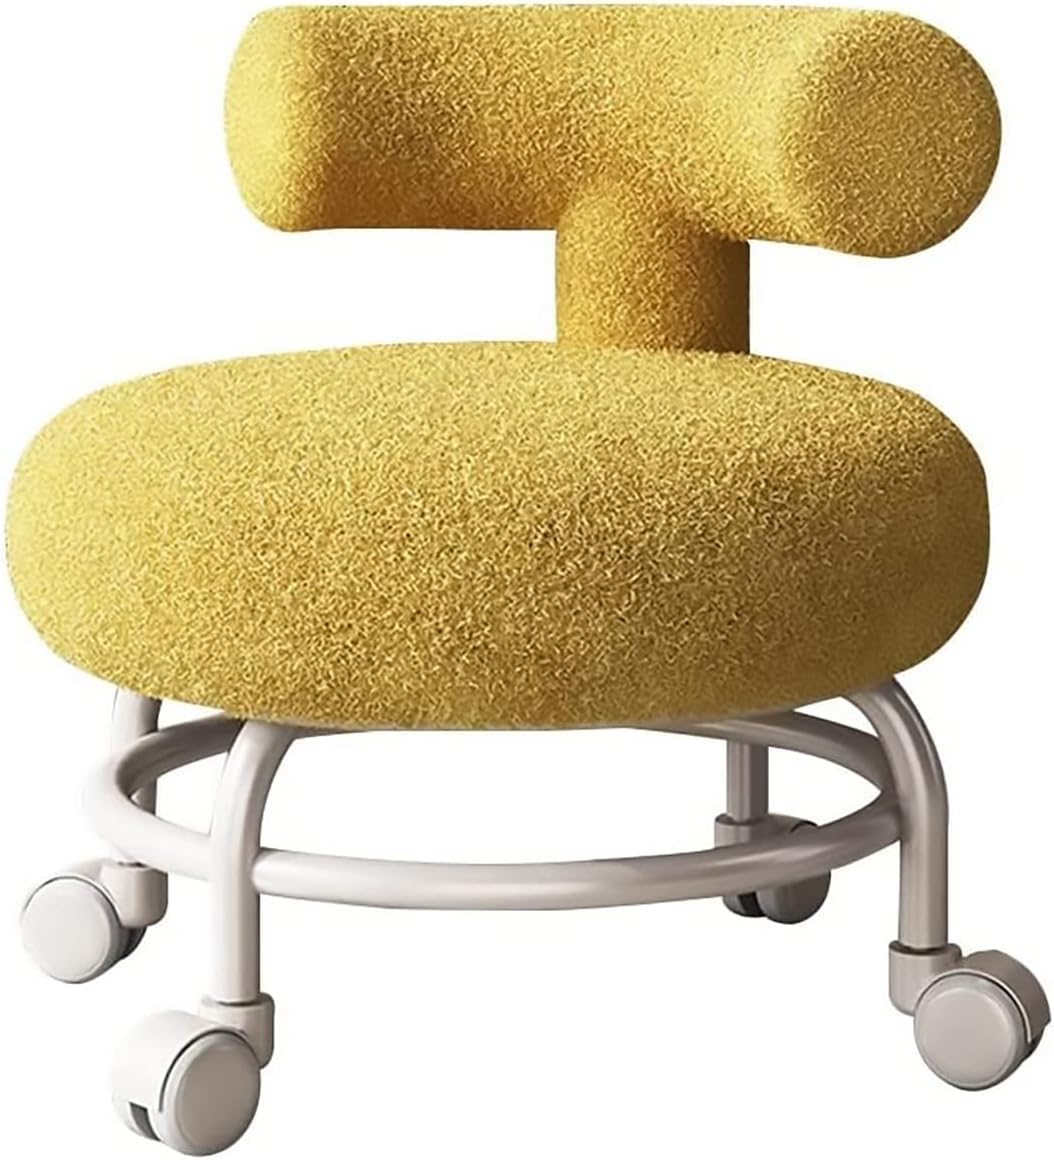 Durable chair with velor seat and wheels